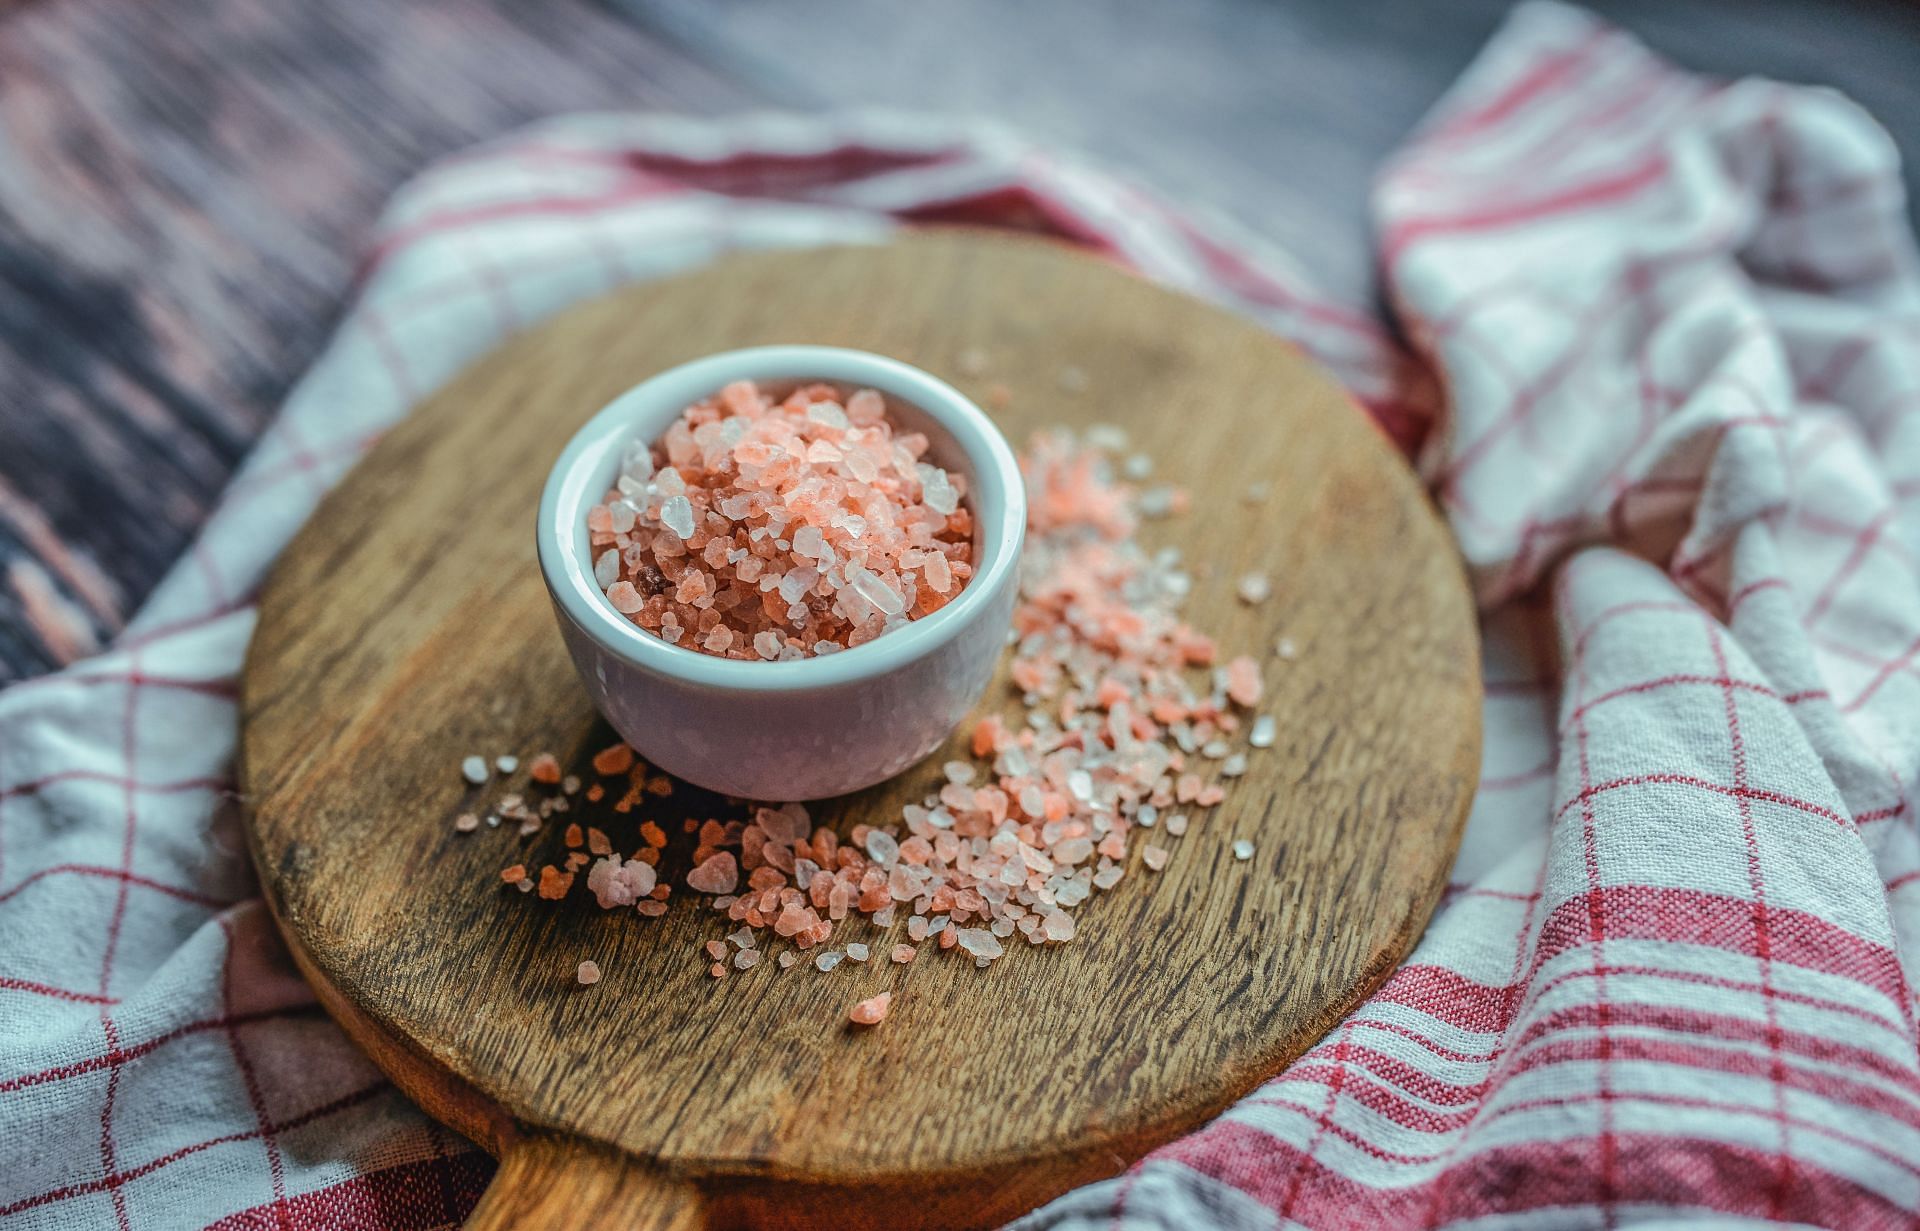 Too much salt in food can make you thirsty and body to retain water (Image via Pexels/Monicore)